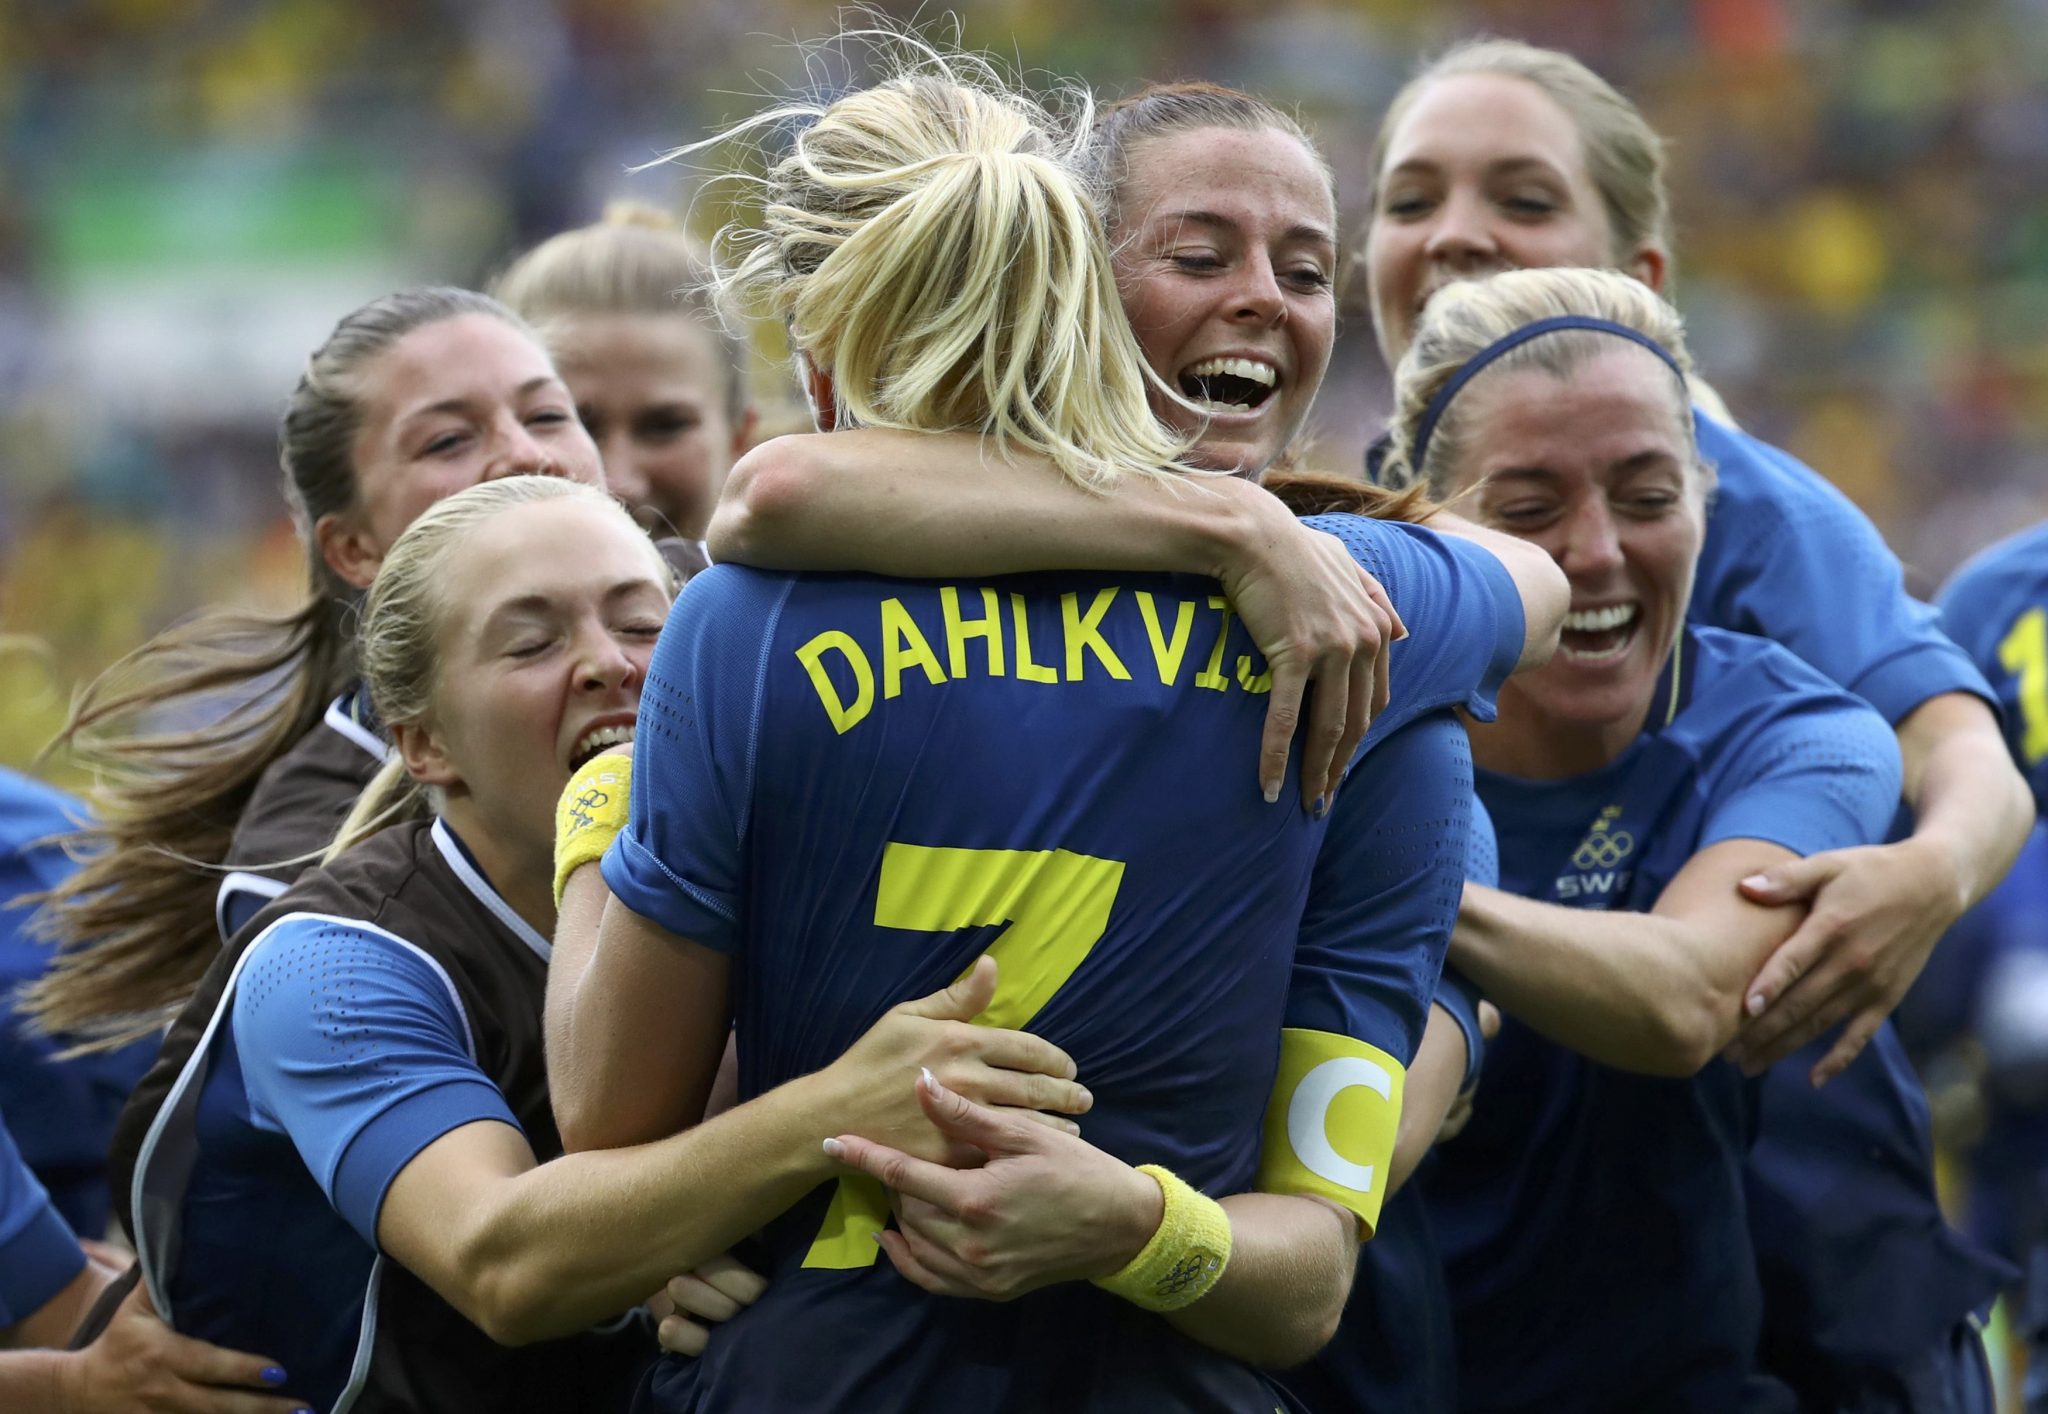 2016 Rio Olympics - Soccer - Semifinal - Women's Football Tournament Semifinal Brazil v Sweden - Maracana - Rio de Janeiro, Brazil - 16/08/2016. Lisa Dahlkvist (SWE) of Sweden (7) celebrates with teammates after scoring the winning goal during the penalty shoot out. REUTERS/Leonhard Foeger TPX IMAGES OF THE DAY FOR EDITORIAL USE ONLY. NOT FOR SALE FOR MARKETING OR ADVERTISING CAMPAIGNS.